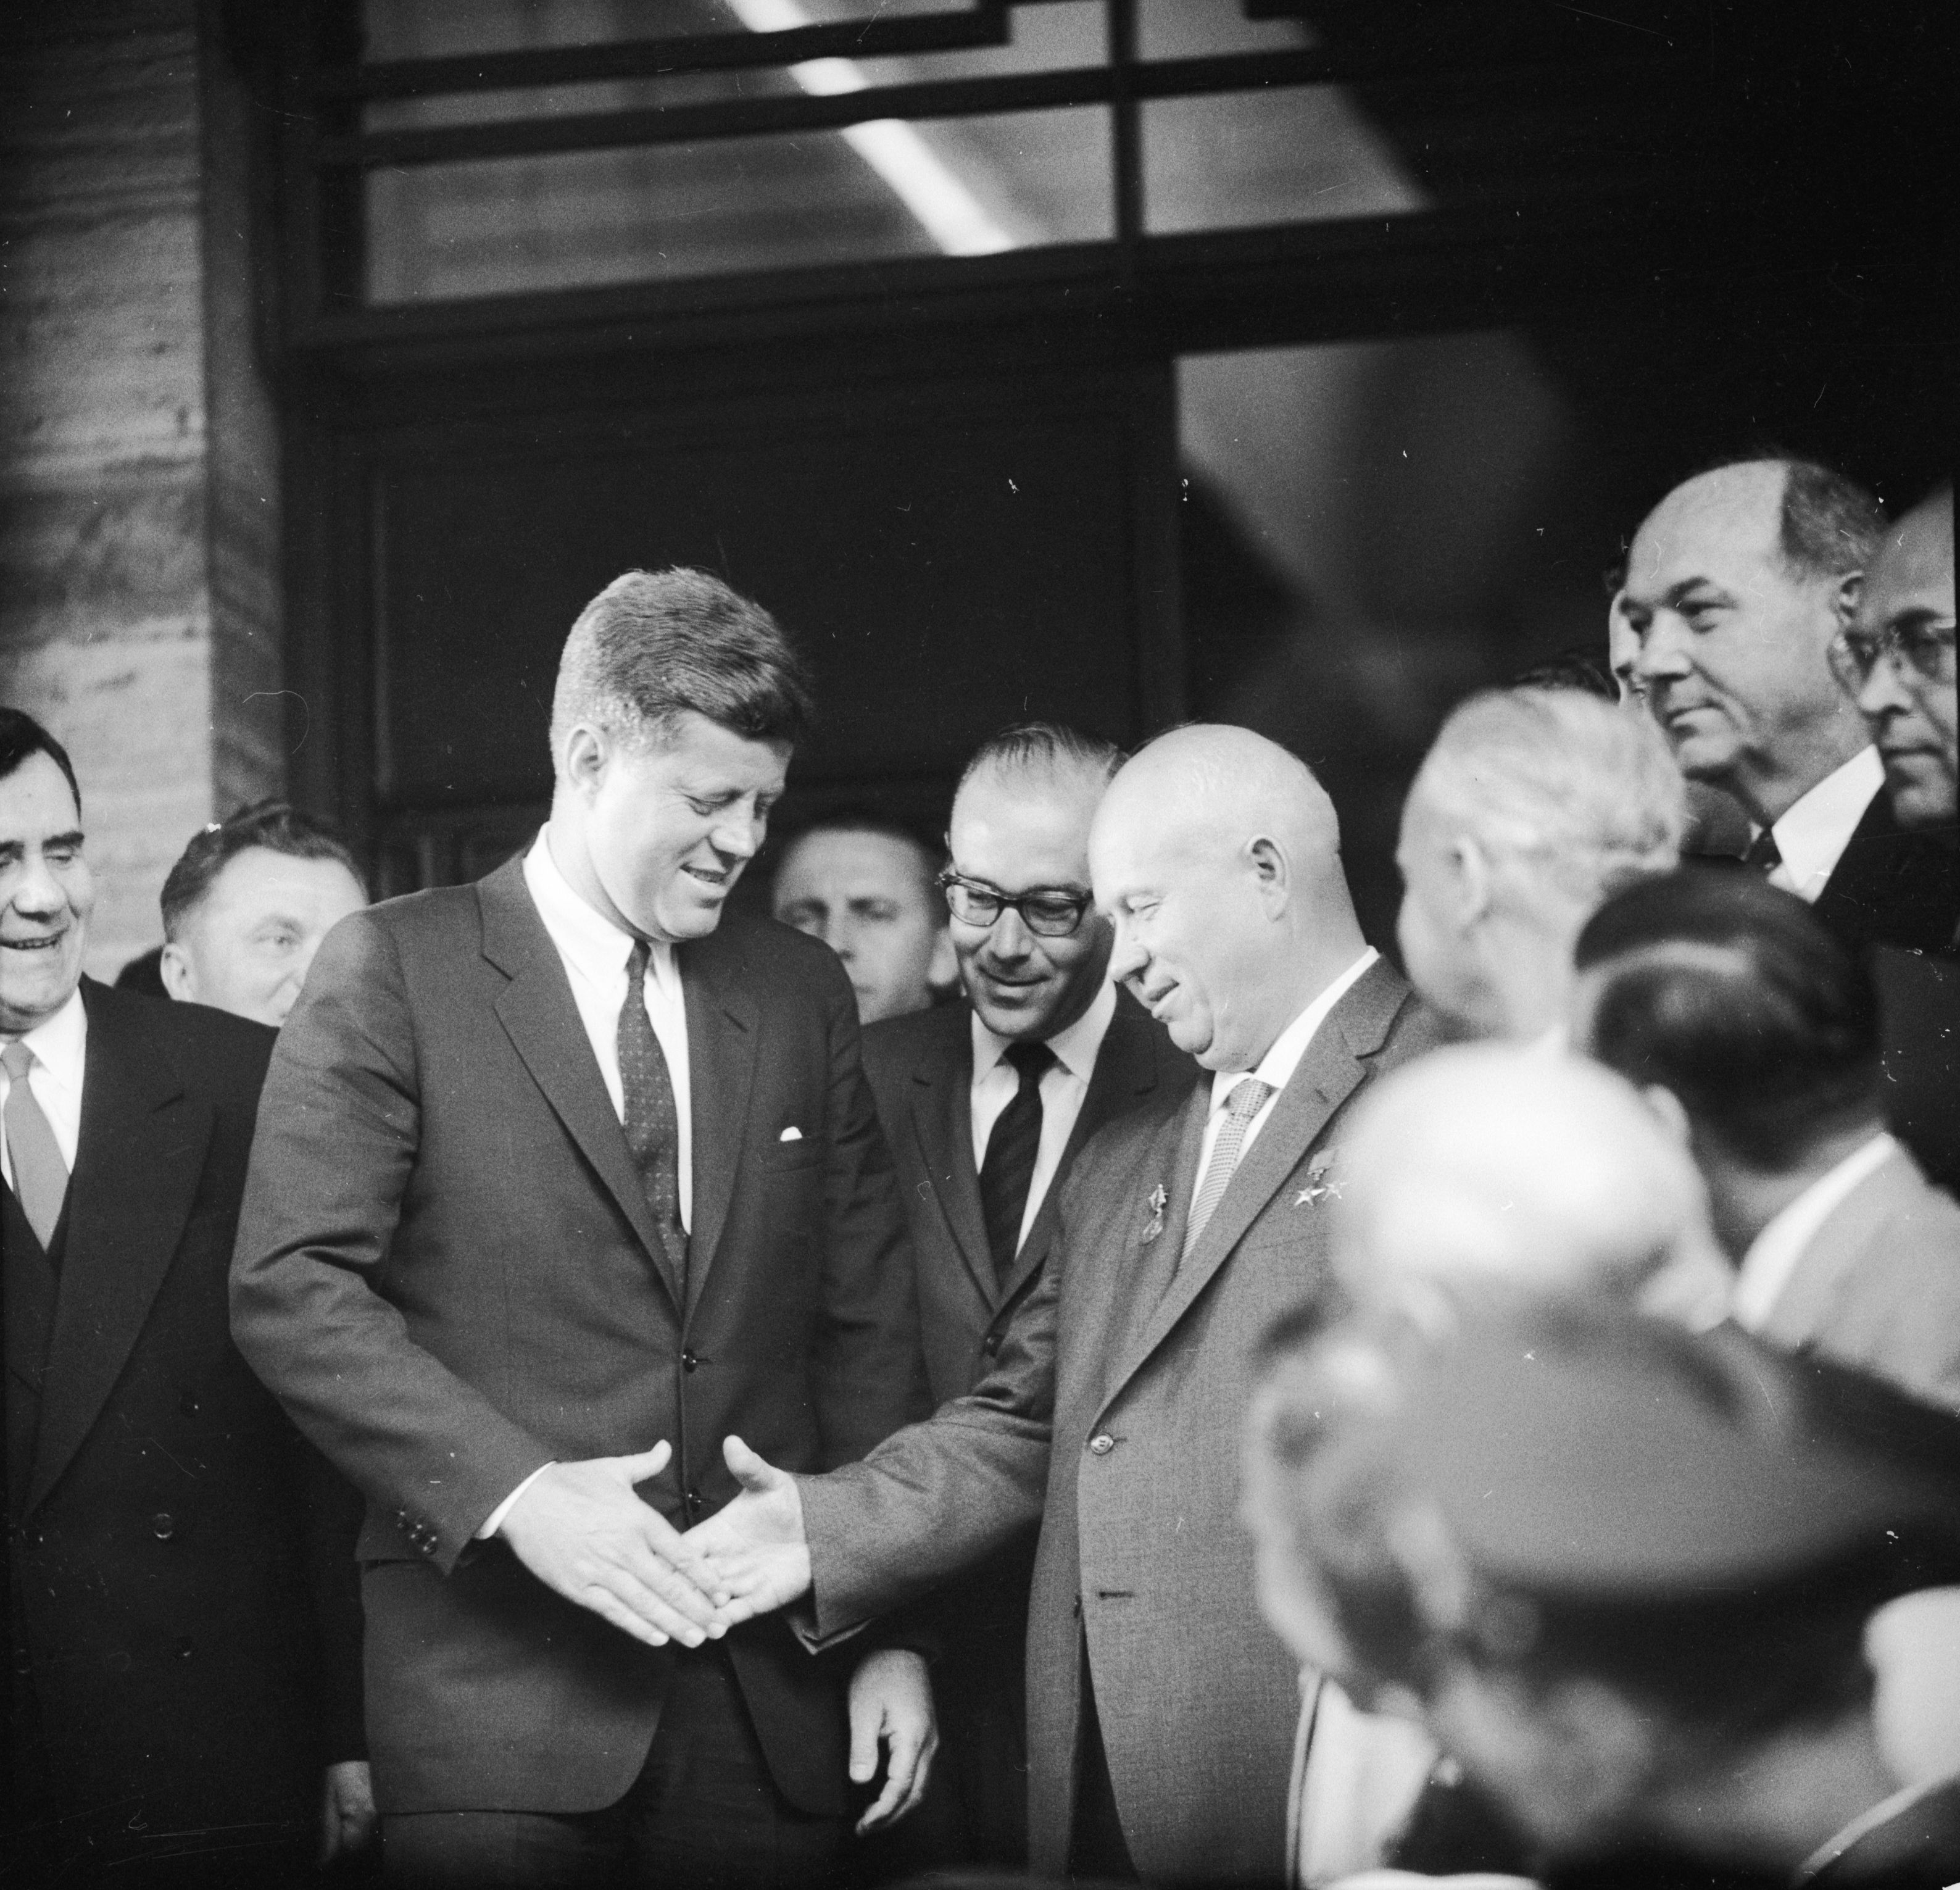 Kennedy and Khrushchev agreed to disagree.